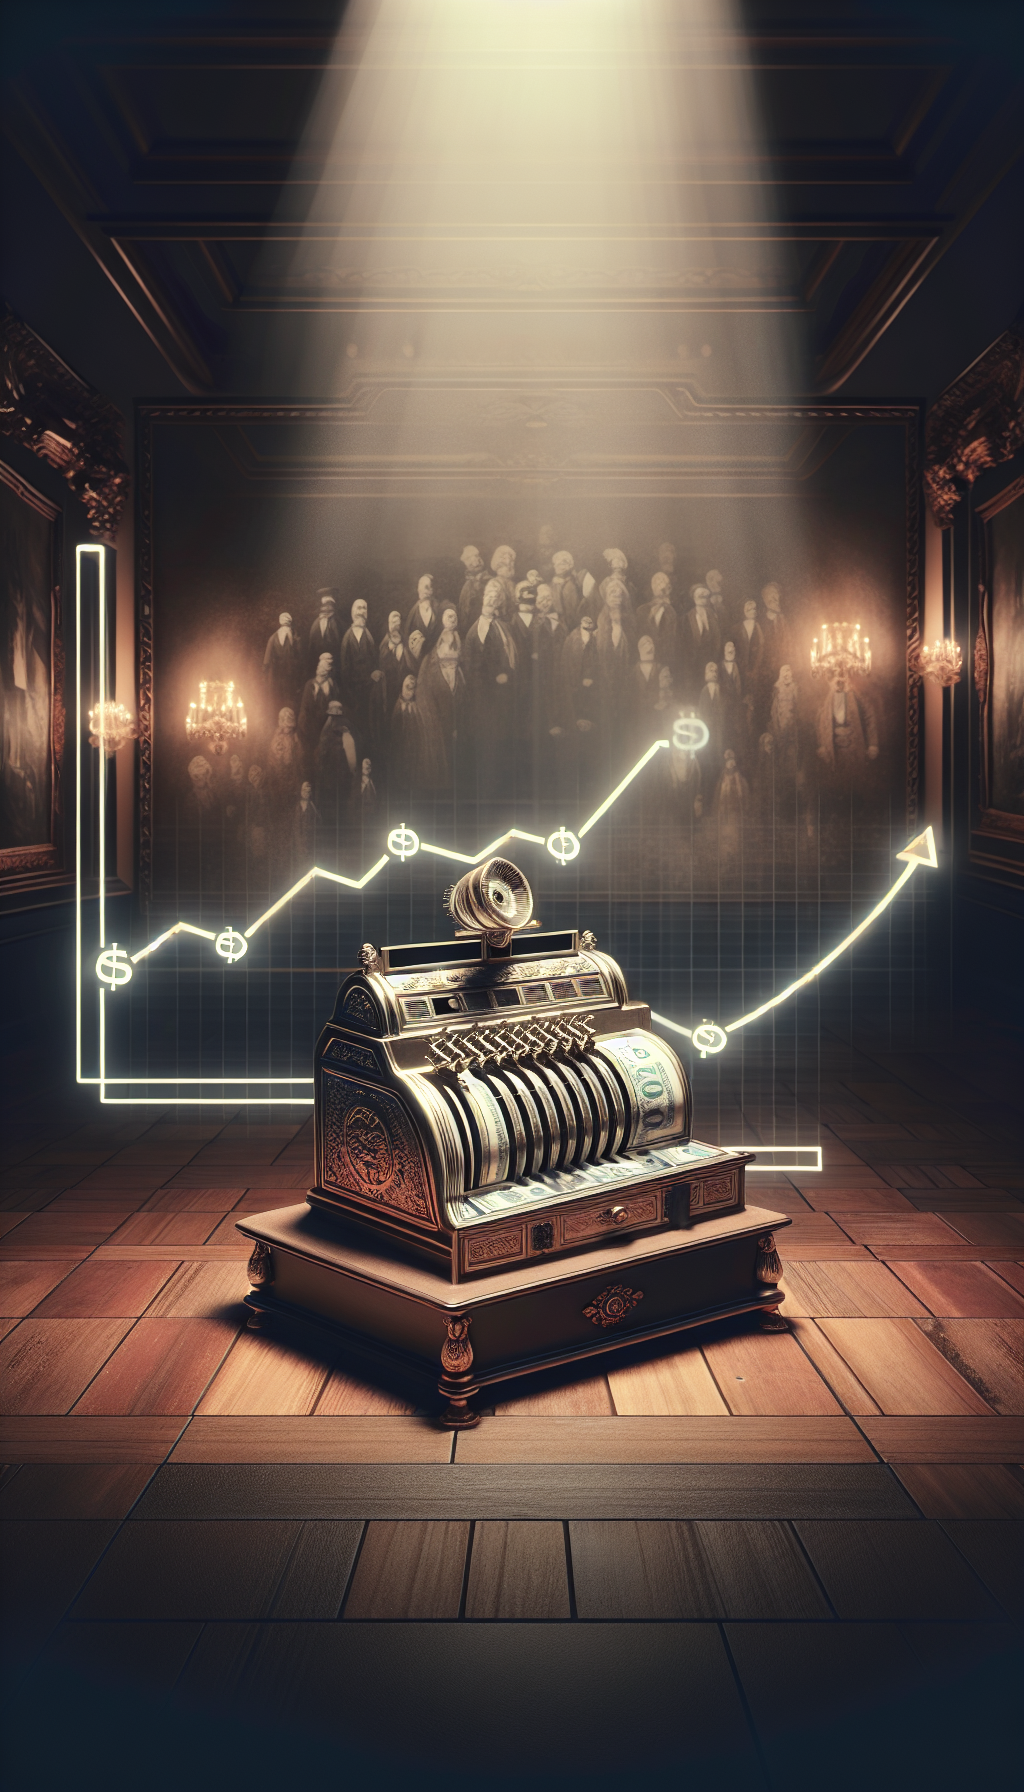 An ornate antique cash register sits atop a pedestal, its brass details glowing under a spotlight amidst a dark, museum-like setting. Beside it, a translucent, ascending chart overlaid with dollar signs suggests its growing value over time. The backdrop features faint, ghostly silhouettes of historical figures exchanging goods, linking past commerce to the register's enduring legacy.